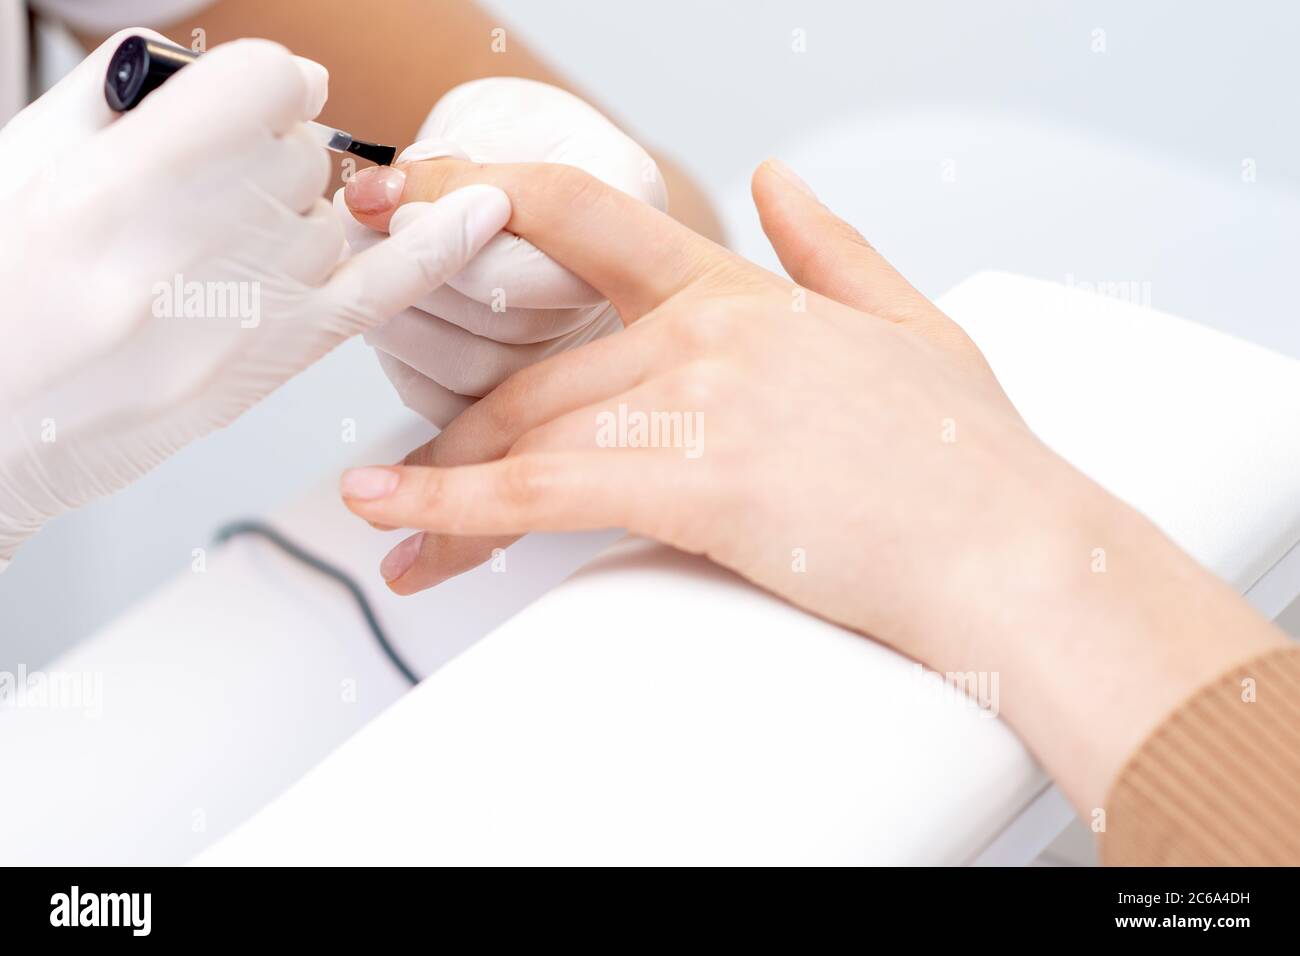 Human hands in protective gloves covering clear varnish on female nails Stock Photo